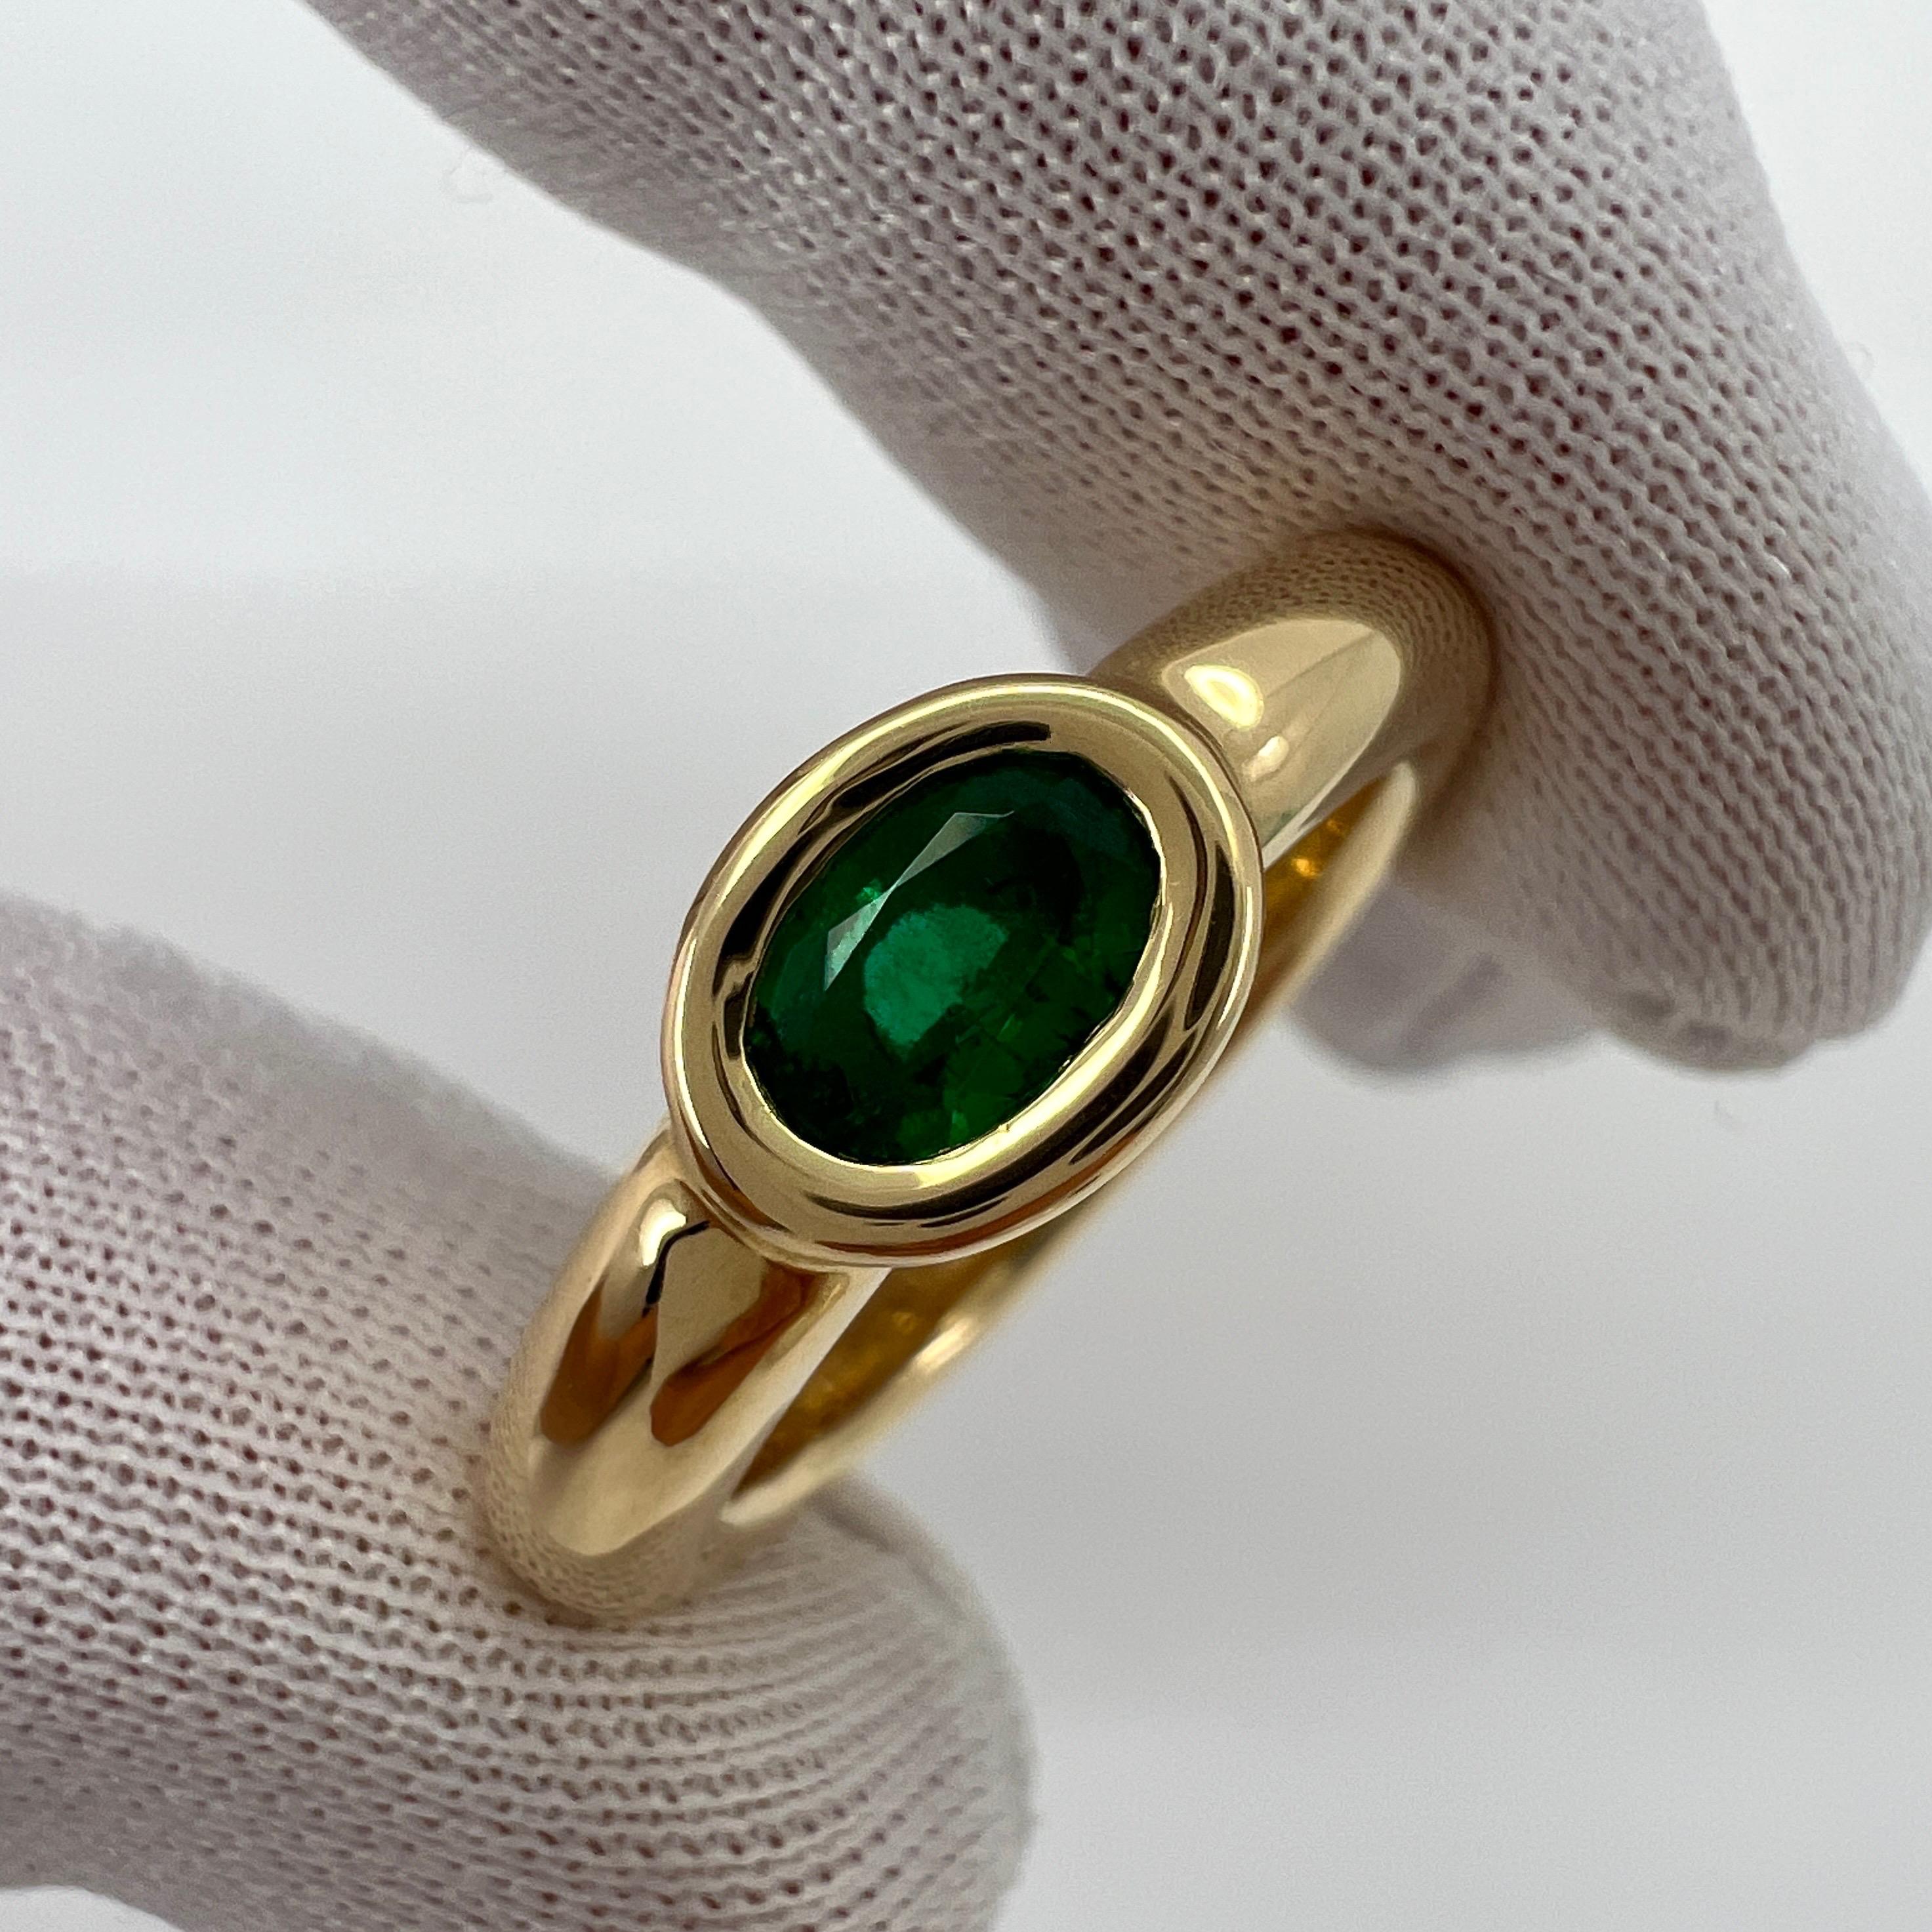 Women's or Men's Vintage Chaumet Green Emerald Oval Cut 18k Yellow Gold Solitaire Bezel Ring